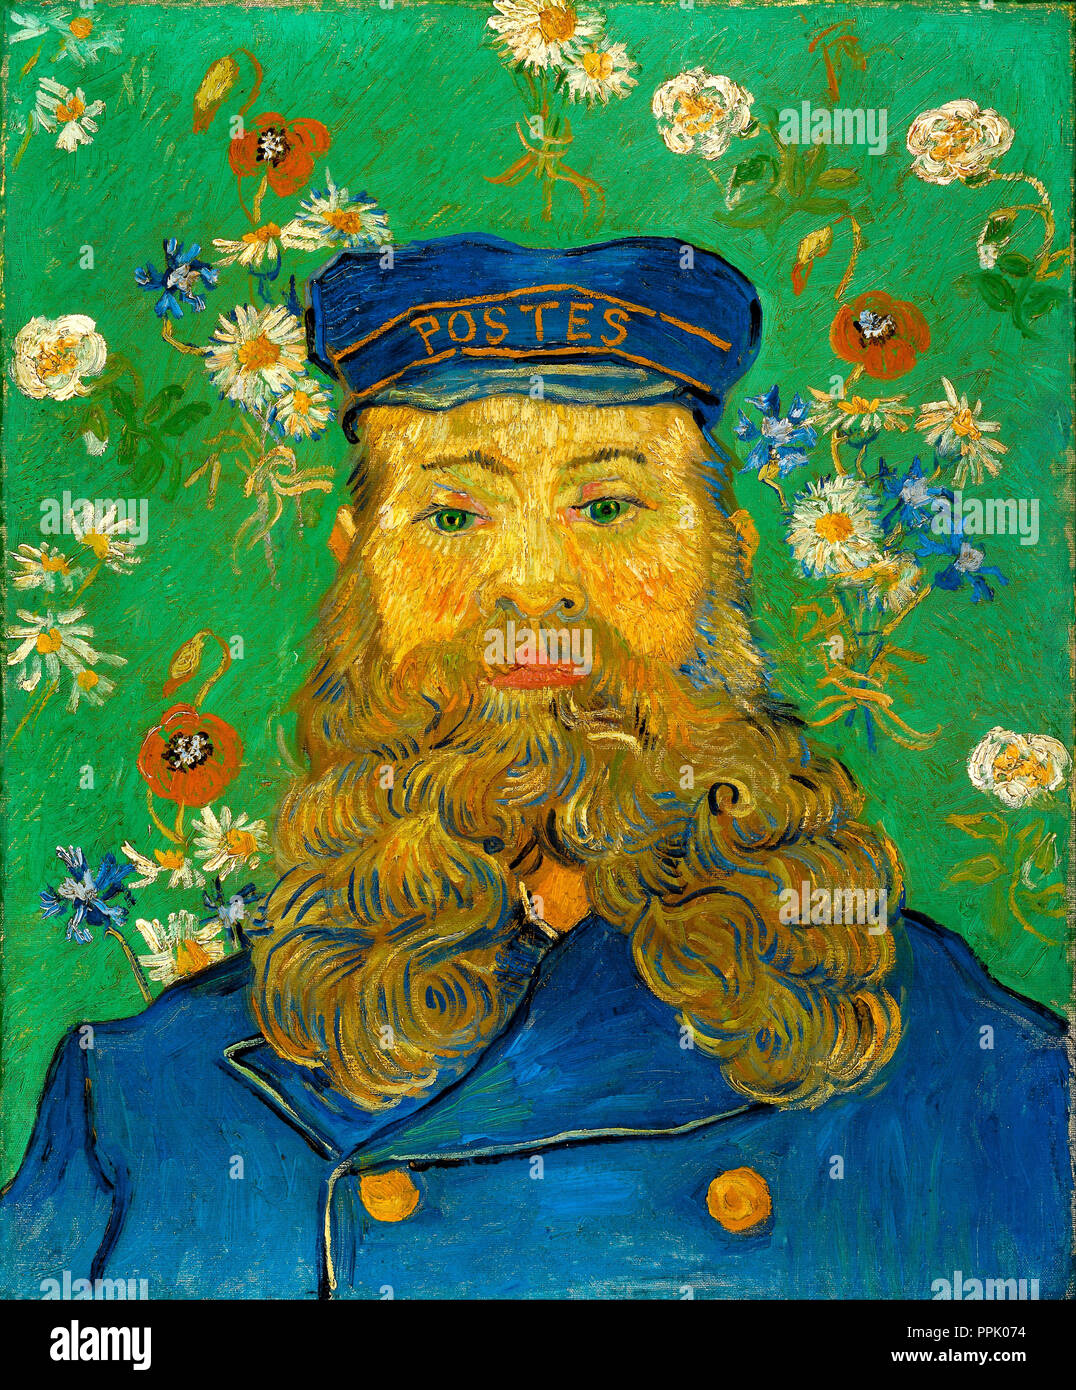 Portrait of Joseph Roulin. Date/Period: April 1889. Painting. Oil on canvas. Height: 65 cm (25.5 in); Width: 54 cm (21.2 in). Author: VINCENT VAN GOGH. Stock Photo